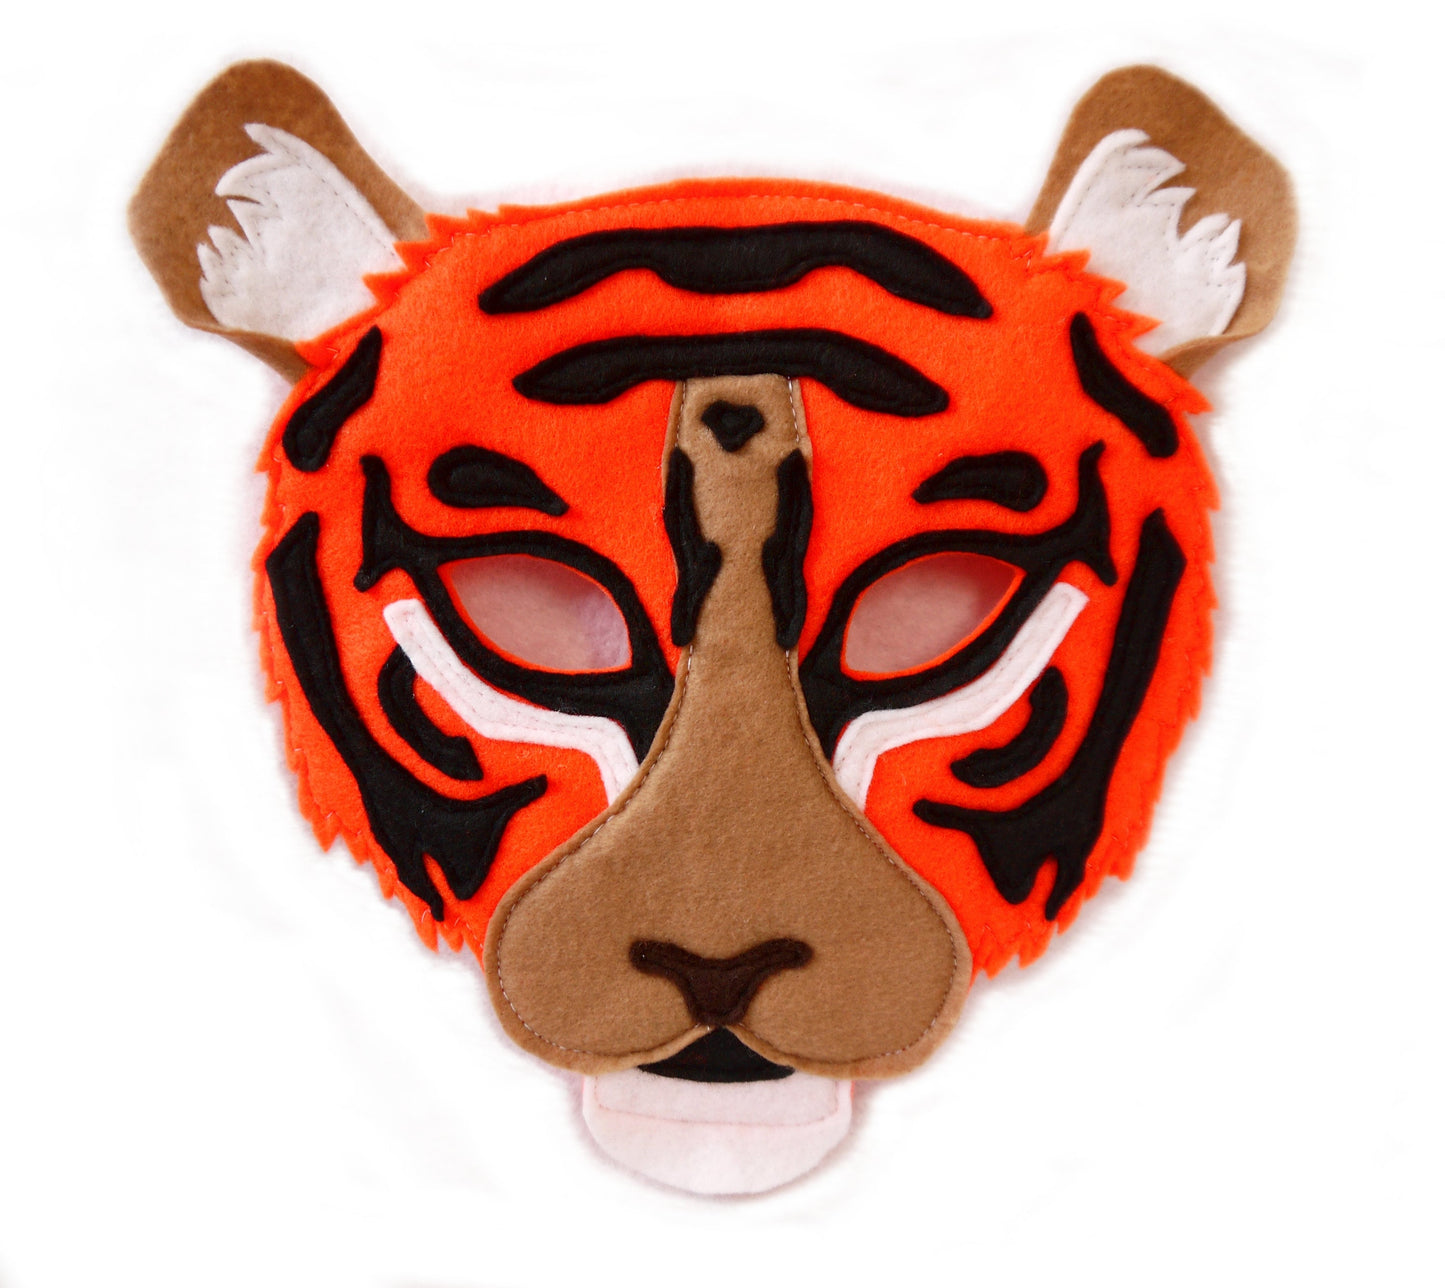 Tiger costume mask, book day costume, jungle book, children's and adult sizes Shere Khan cosplay